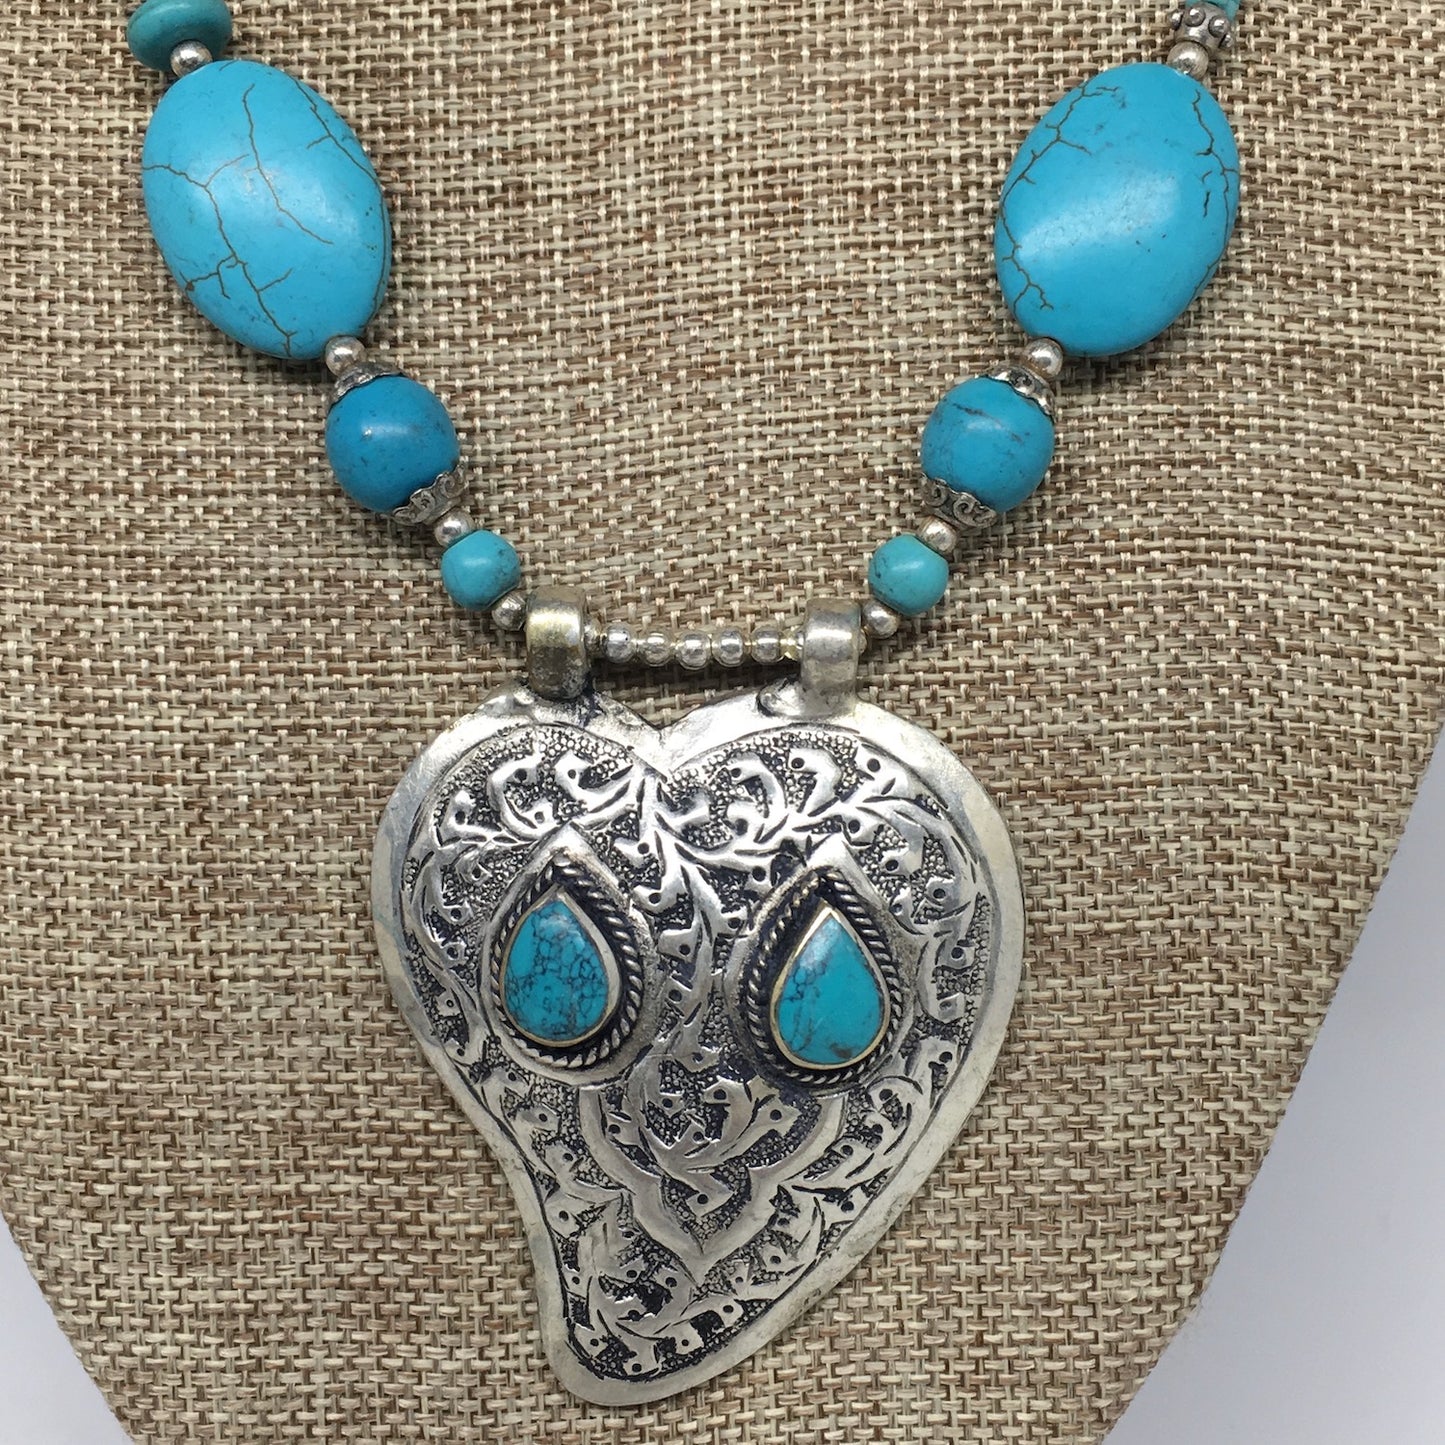 1pc,Turkmen Necklace Pendant Statement Tribal Turquoise Inlay Beaded,20-21",BN09